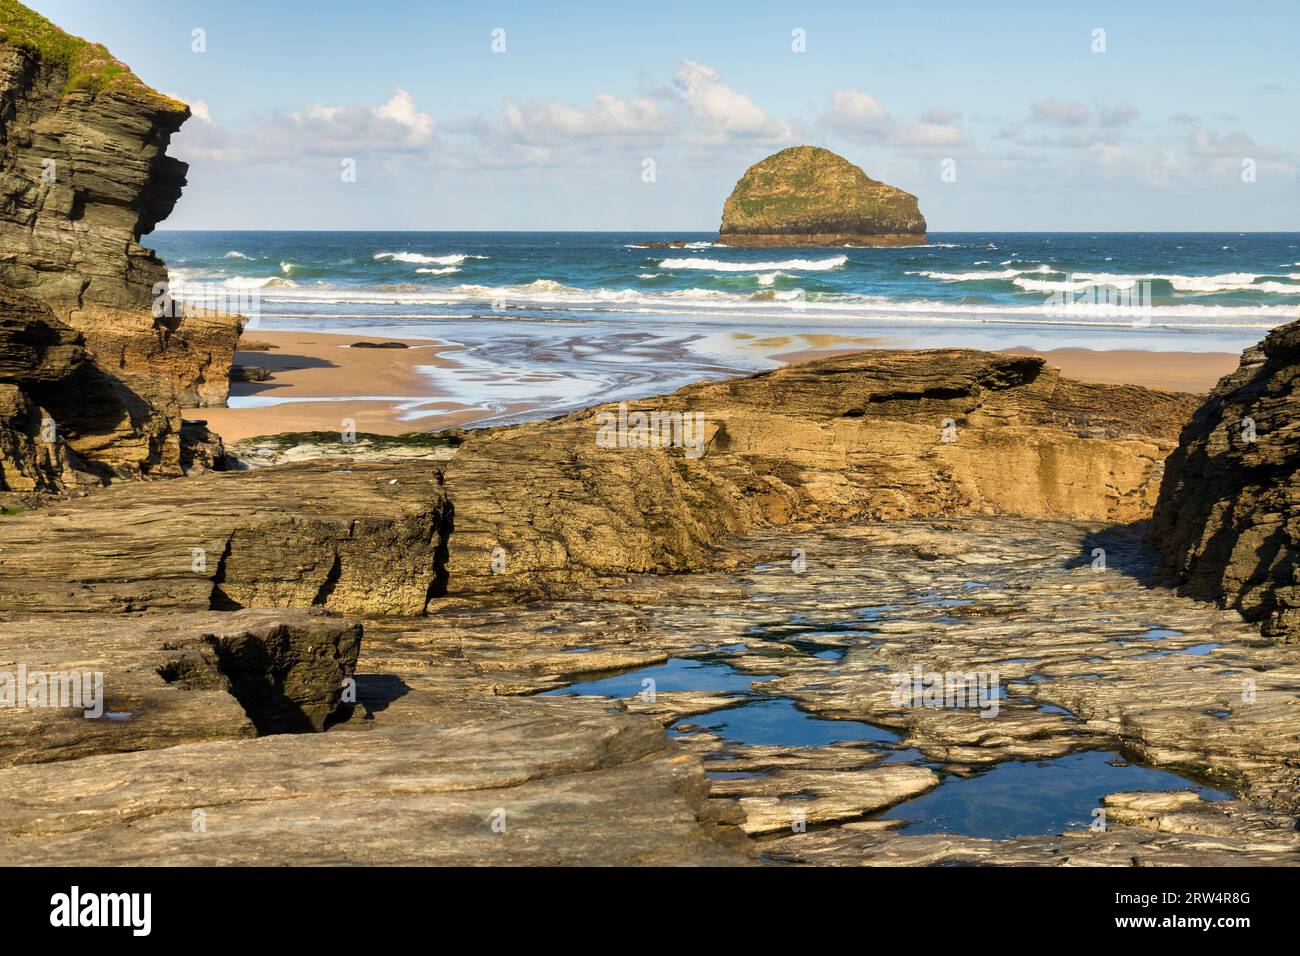 The rocky entrance to the beach at Trebarwith Strand, Cornwall, and the small island of Gull Rock. Stock Photo